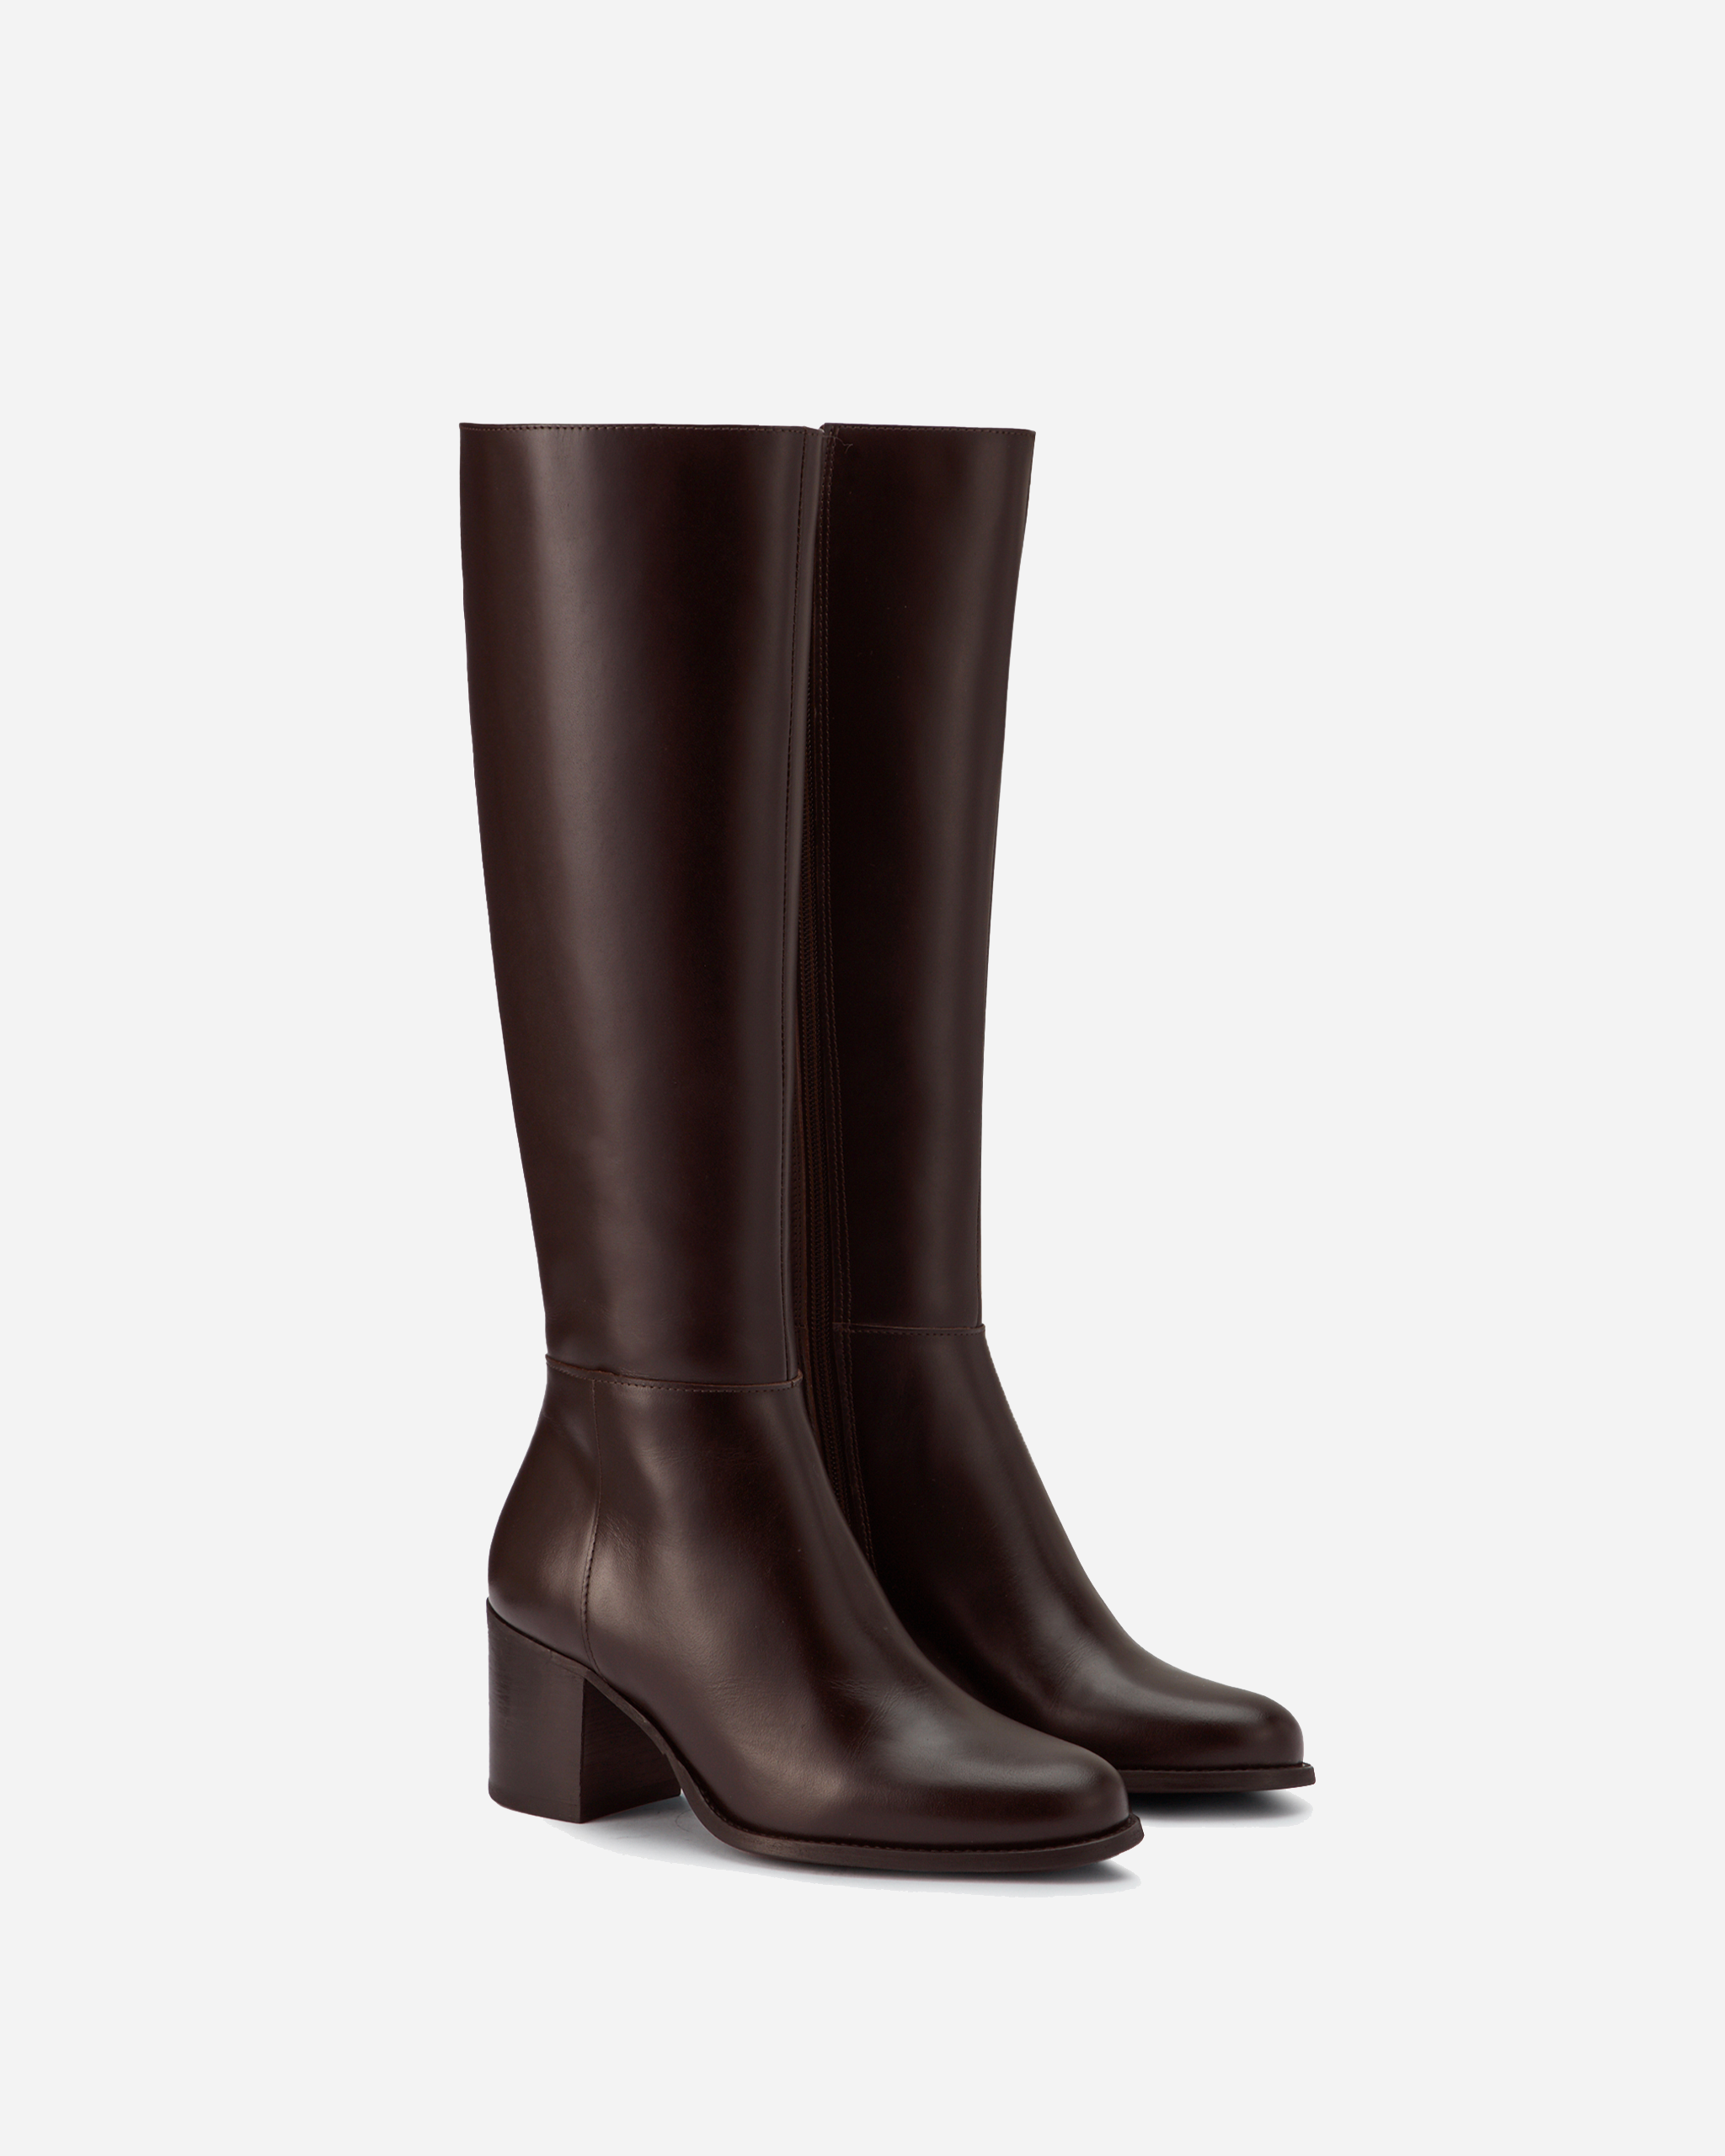 Tall knee high brown leather boots